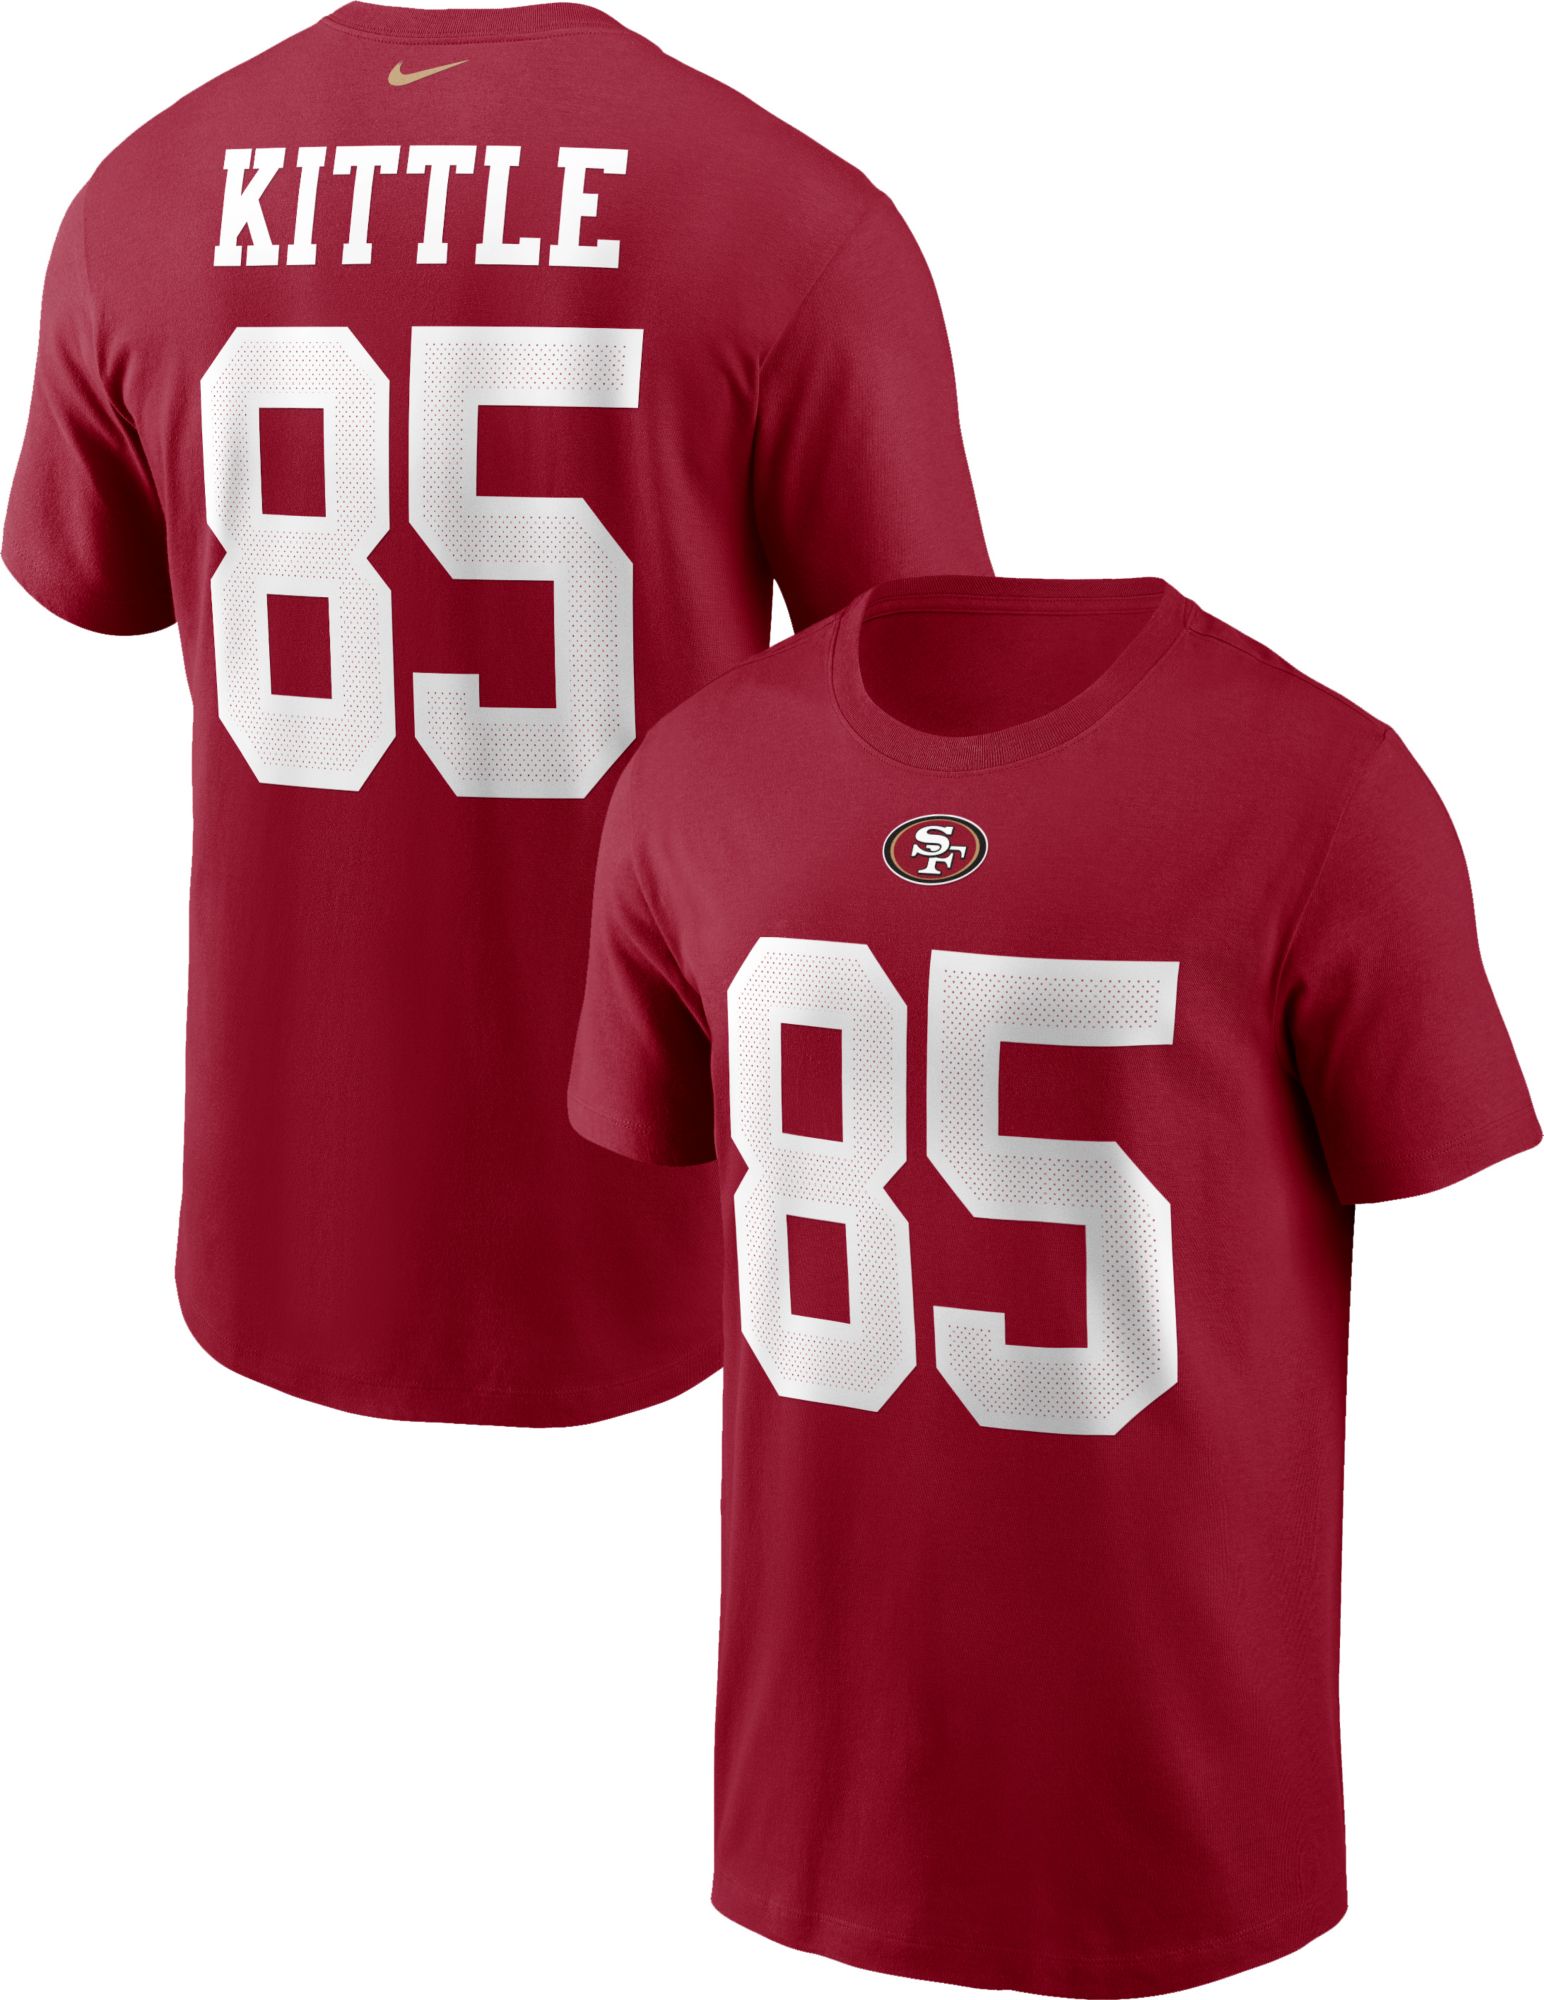 85 49ers jersey